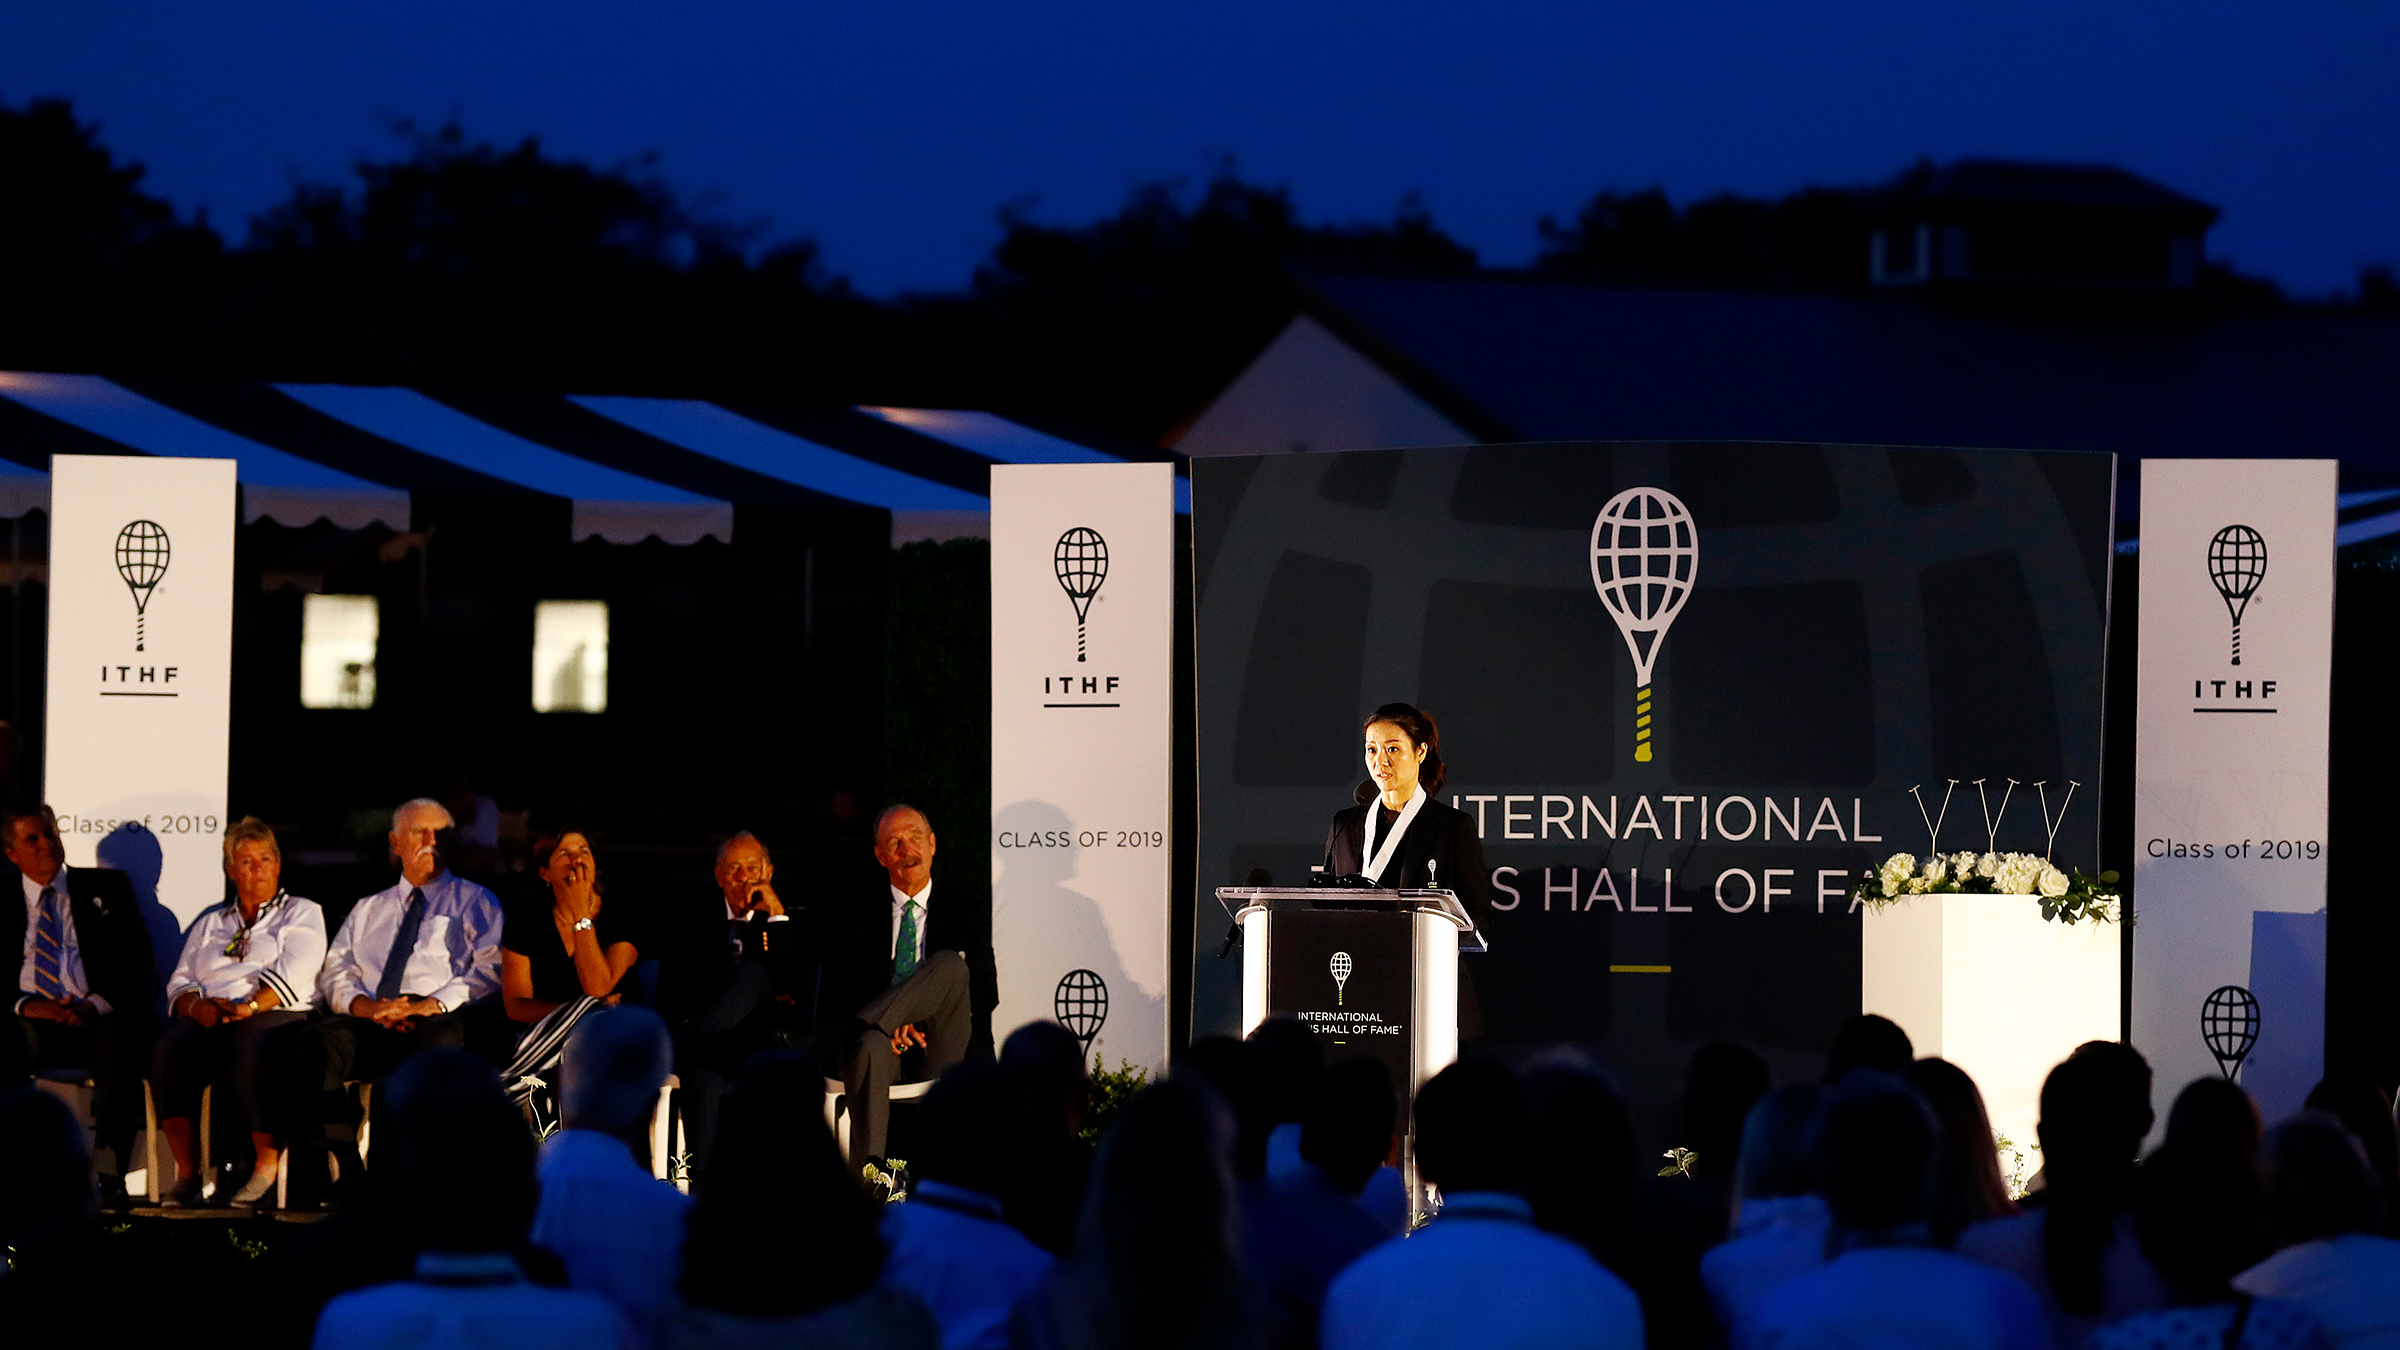 Li Na gives her speech after being inducted into the International Tennis Hall of Fame in Newport, Rhode Island on July 20, 2019. (Omar Rawlings— International Tennis Hall of Fame/Getty Images)